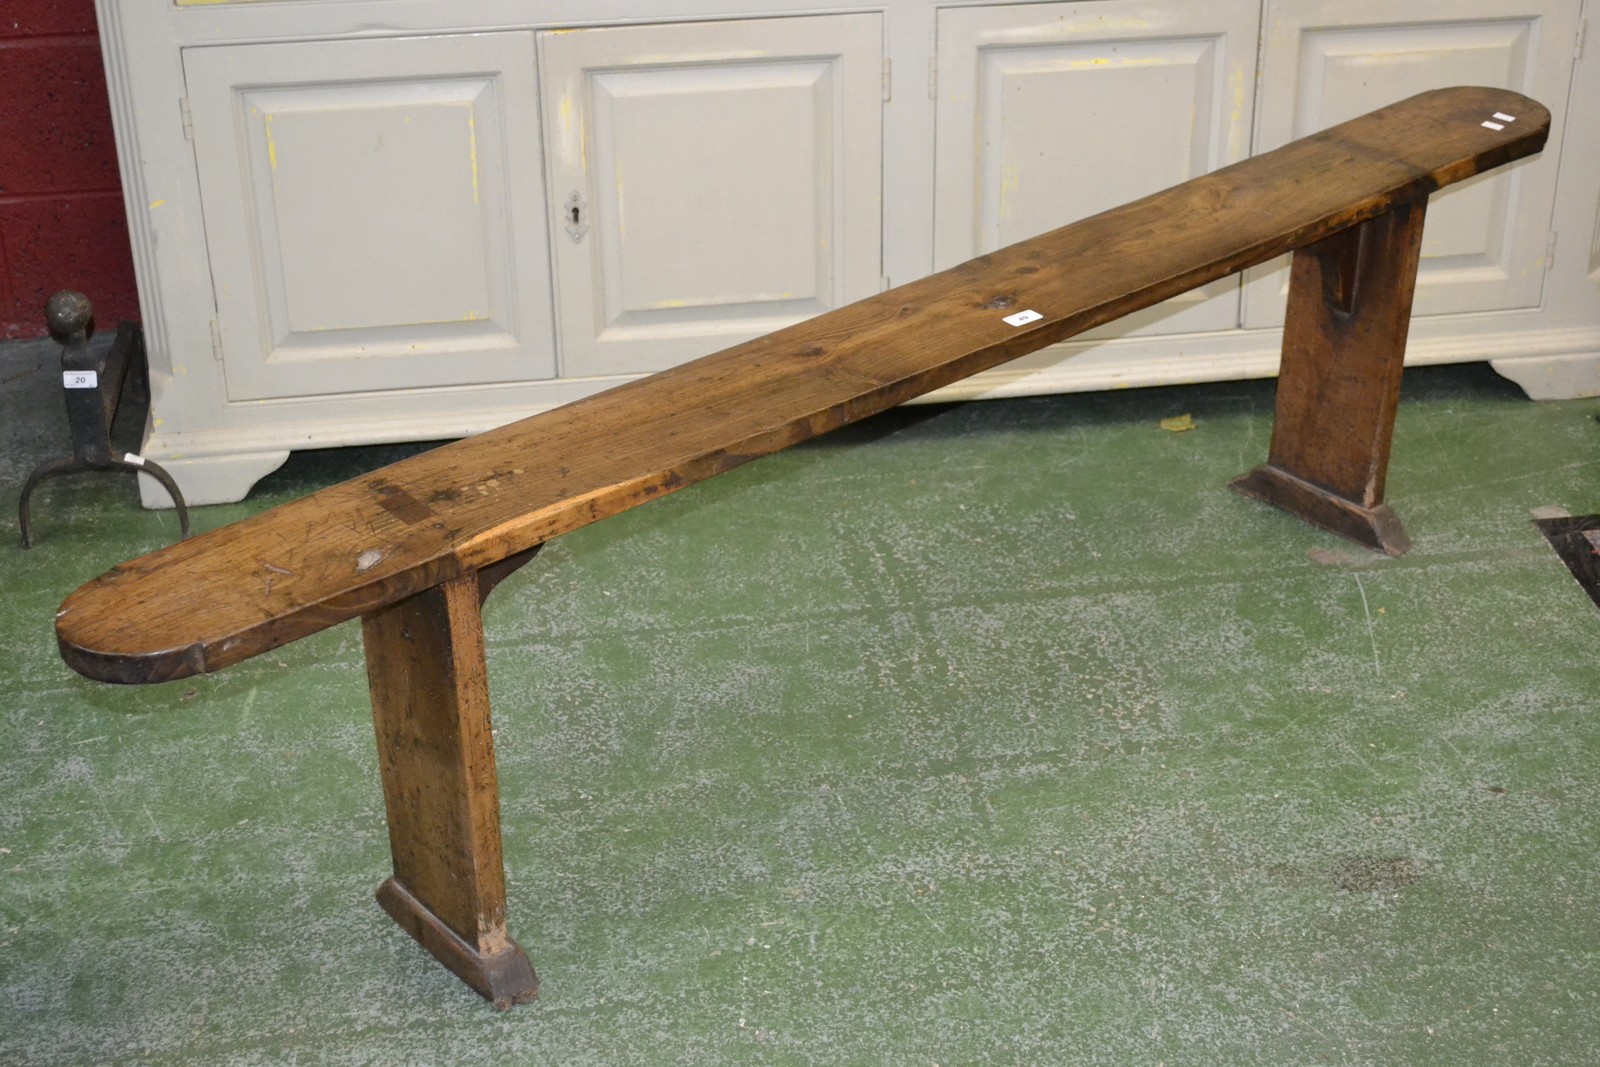 An elm country kitchen bench.